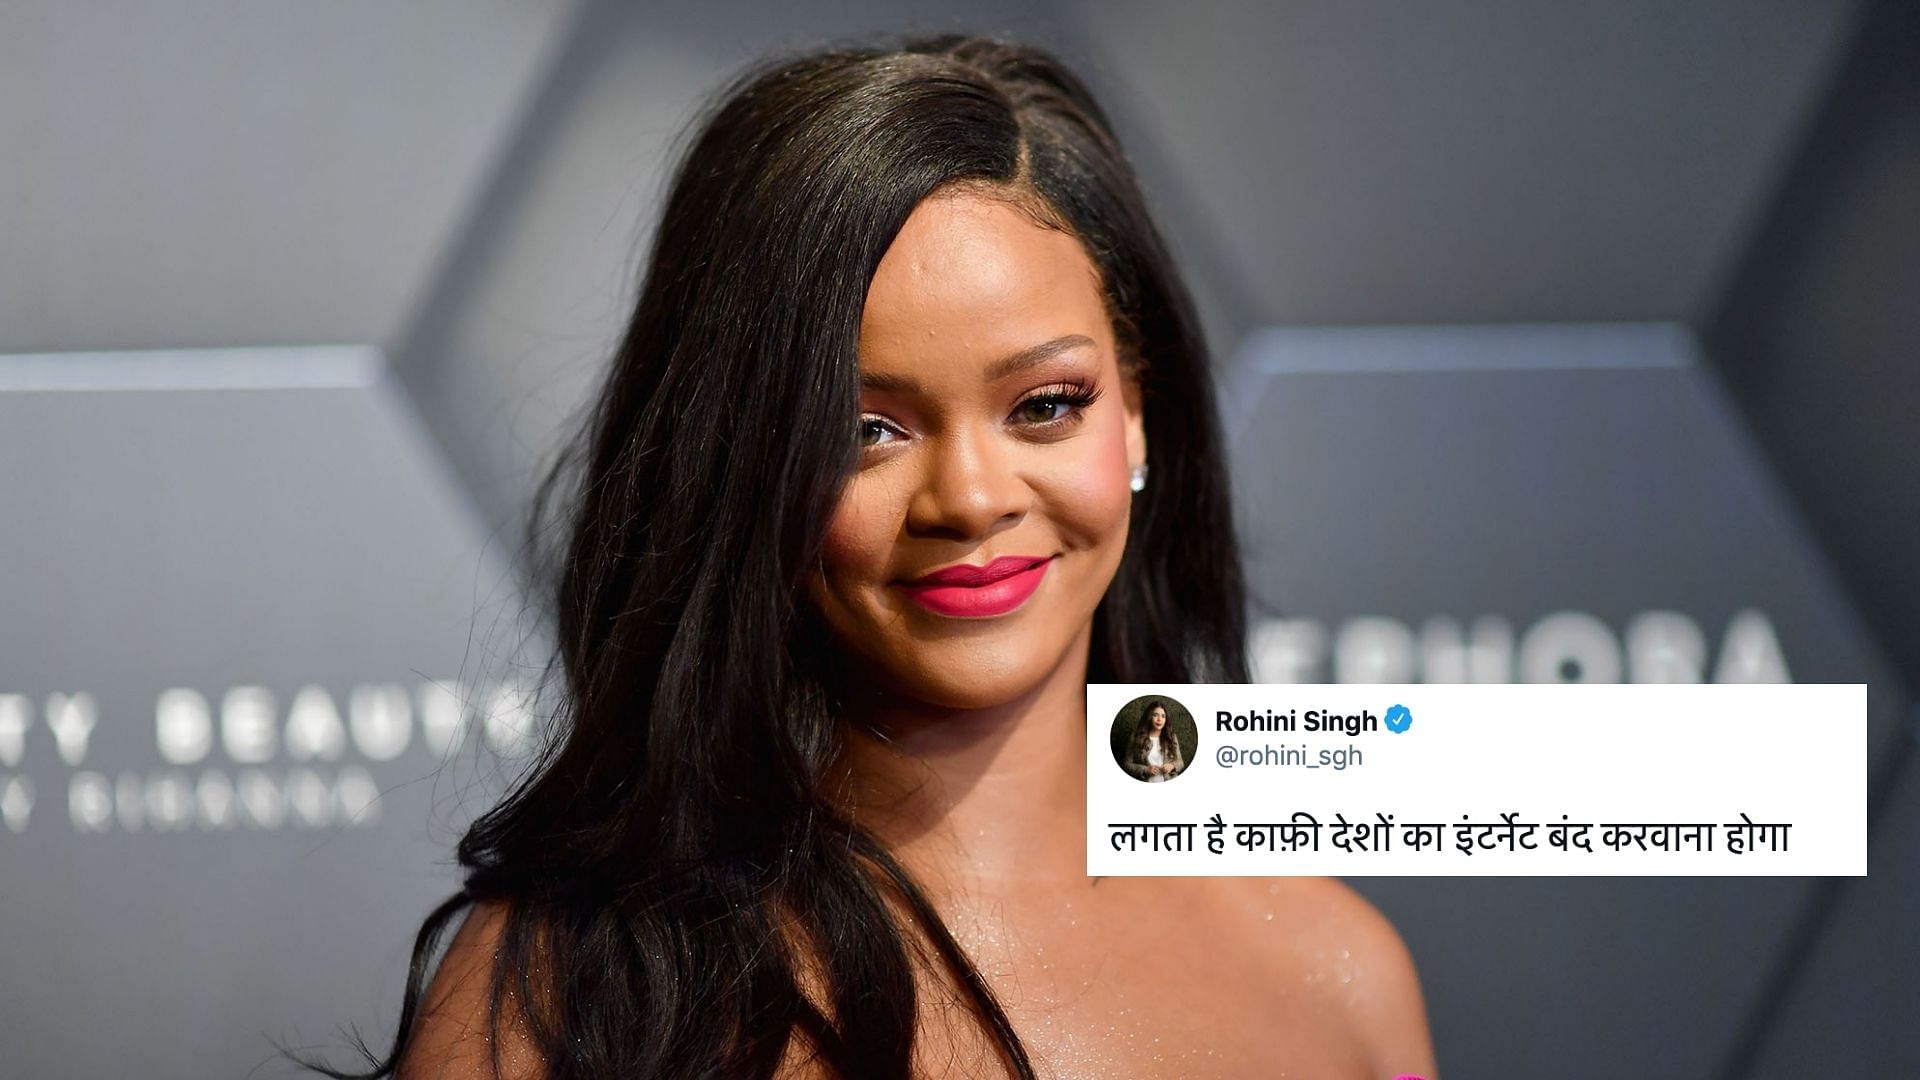 Here's what Twitter had to say about Rihanna lending her voice to farmers protest in India. 